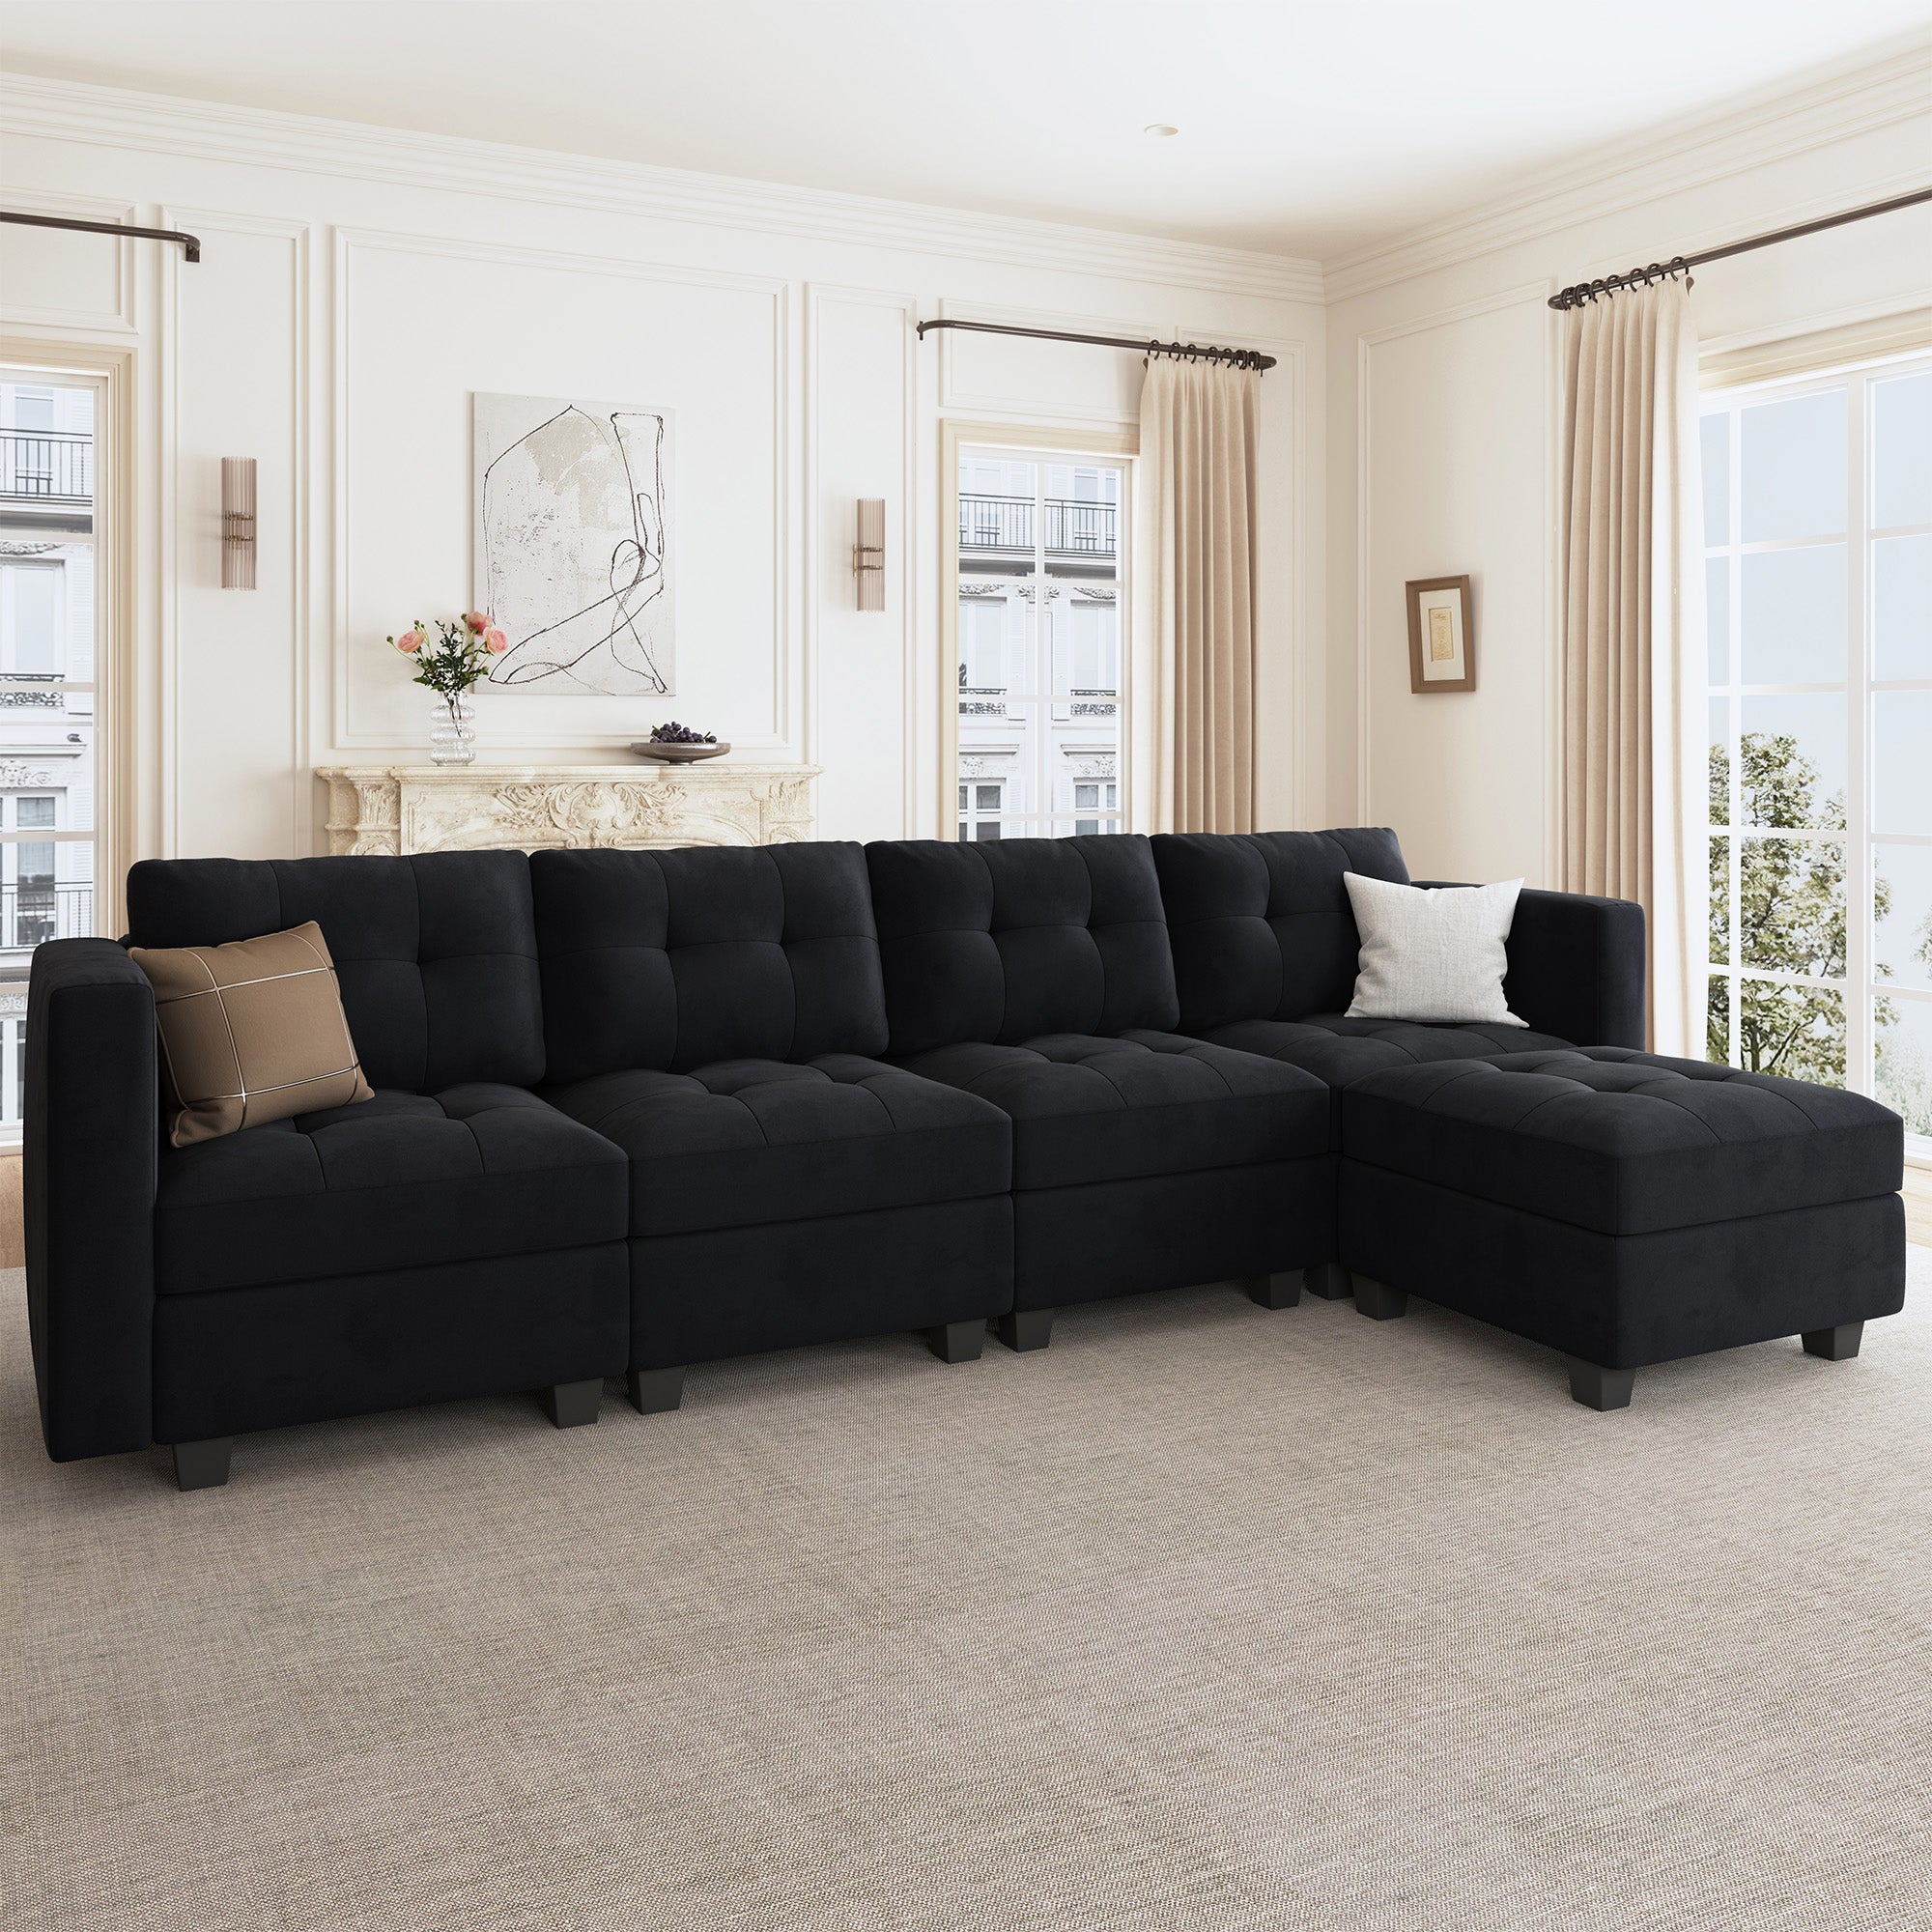 HONBAY 5-Piece Velvet Modular Sectional With Storage Seat